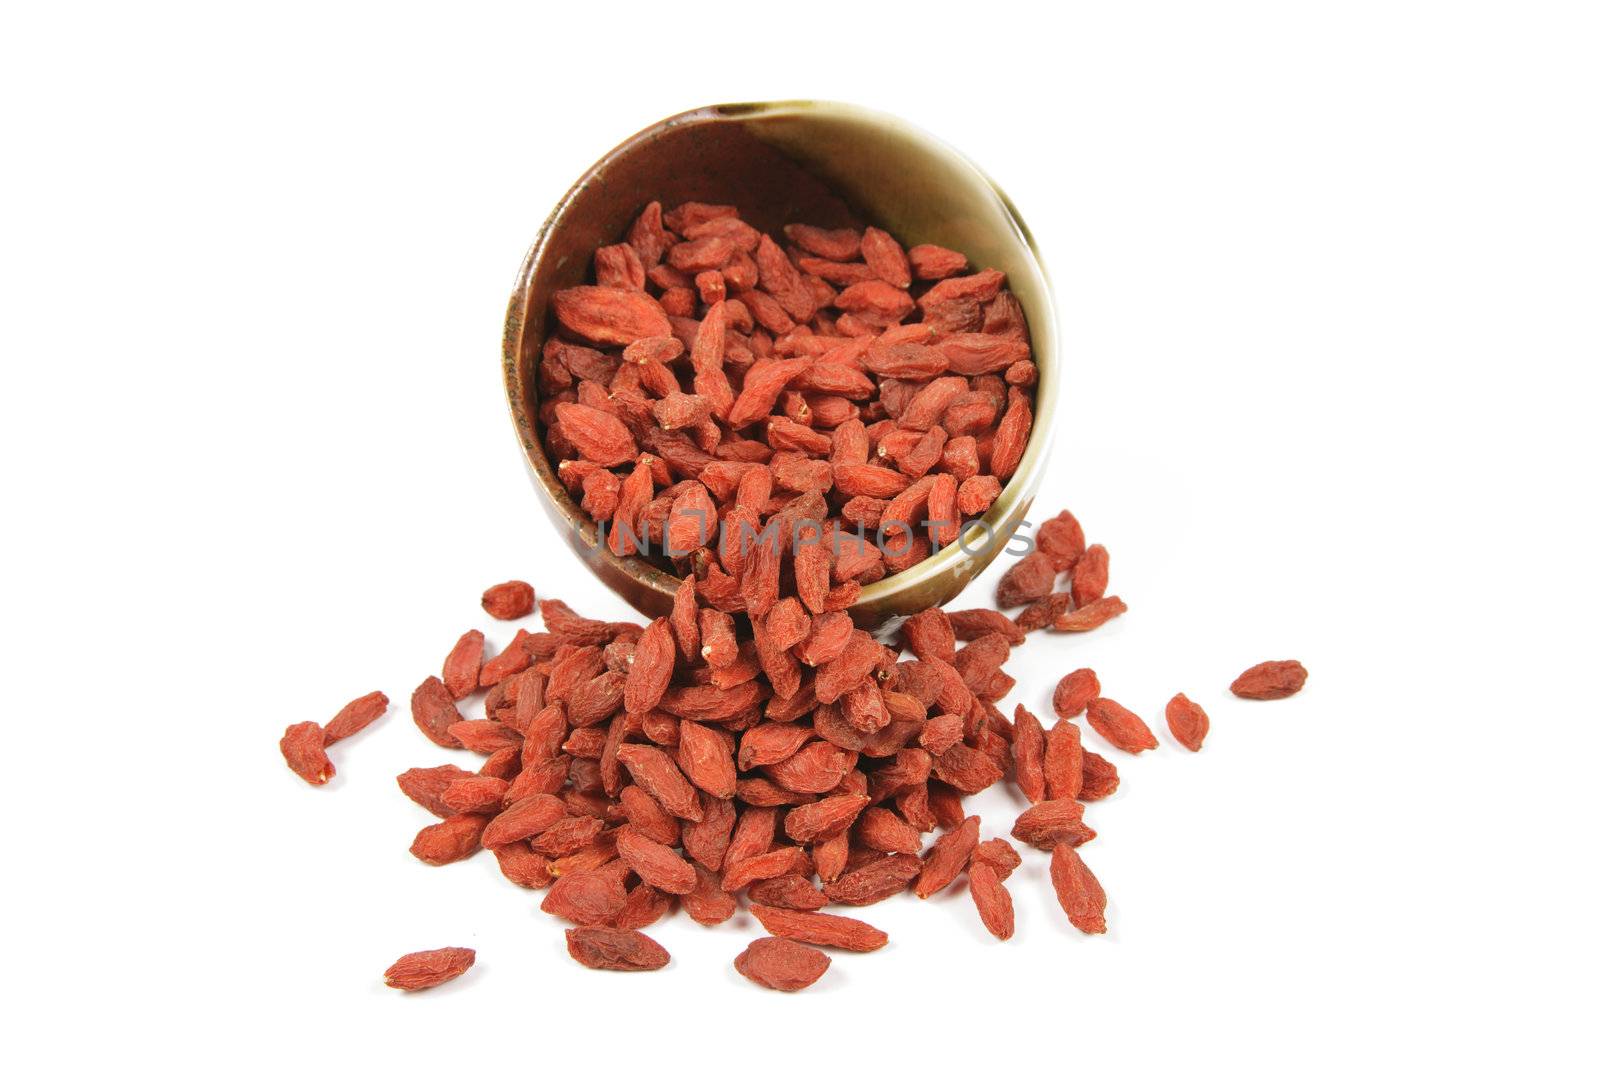 Red dry goji berries spilling out of a green and brown dish on a reflective white background